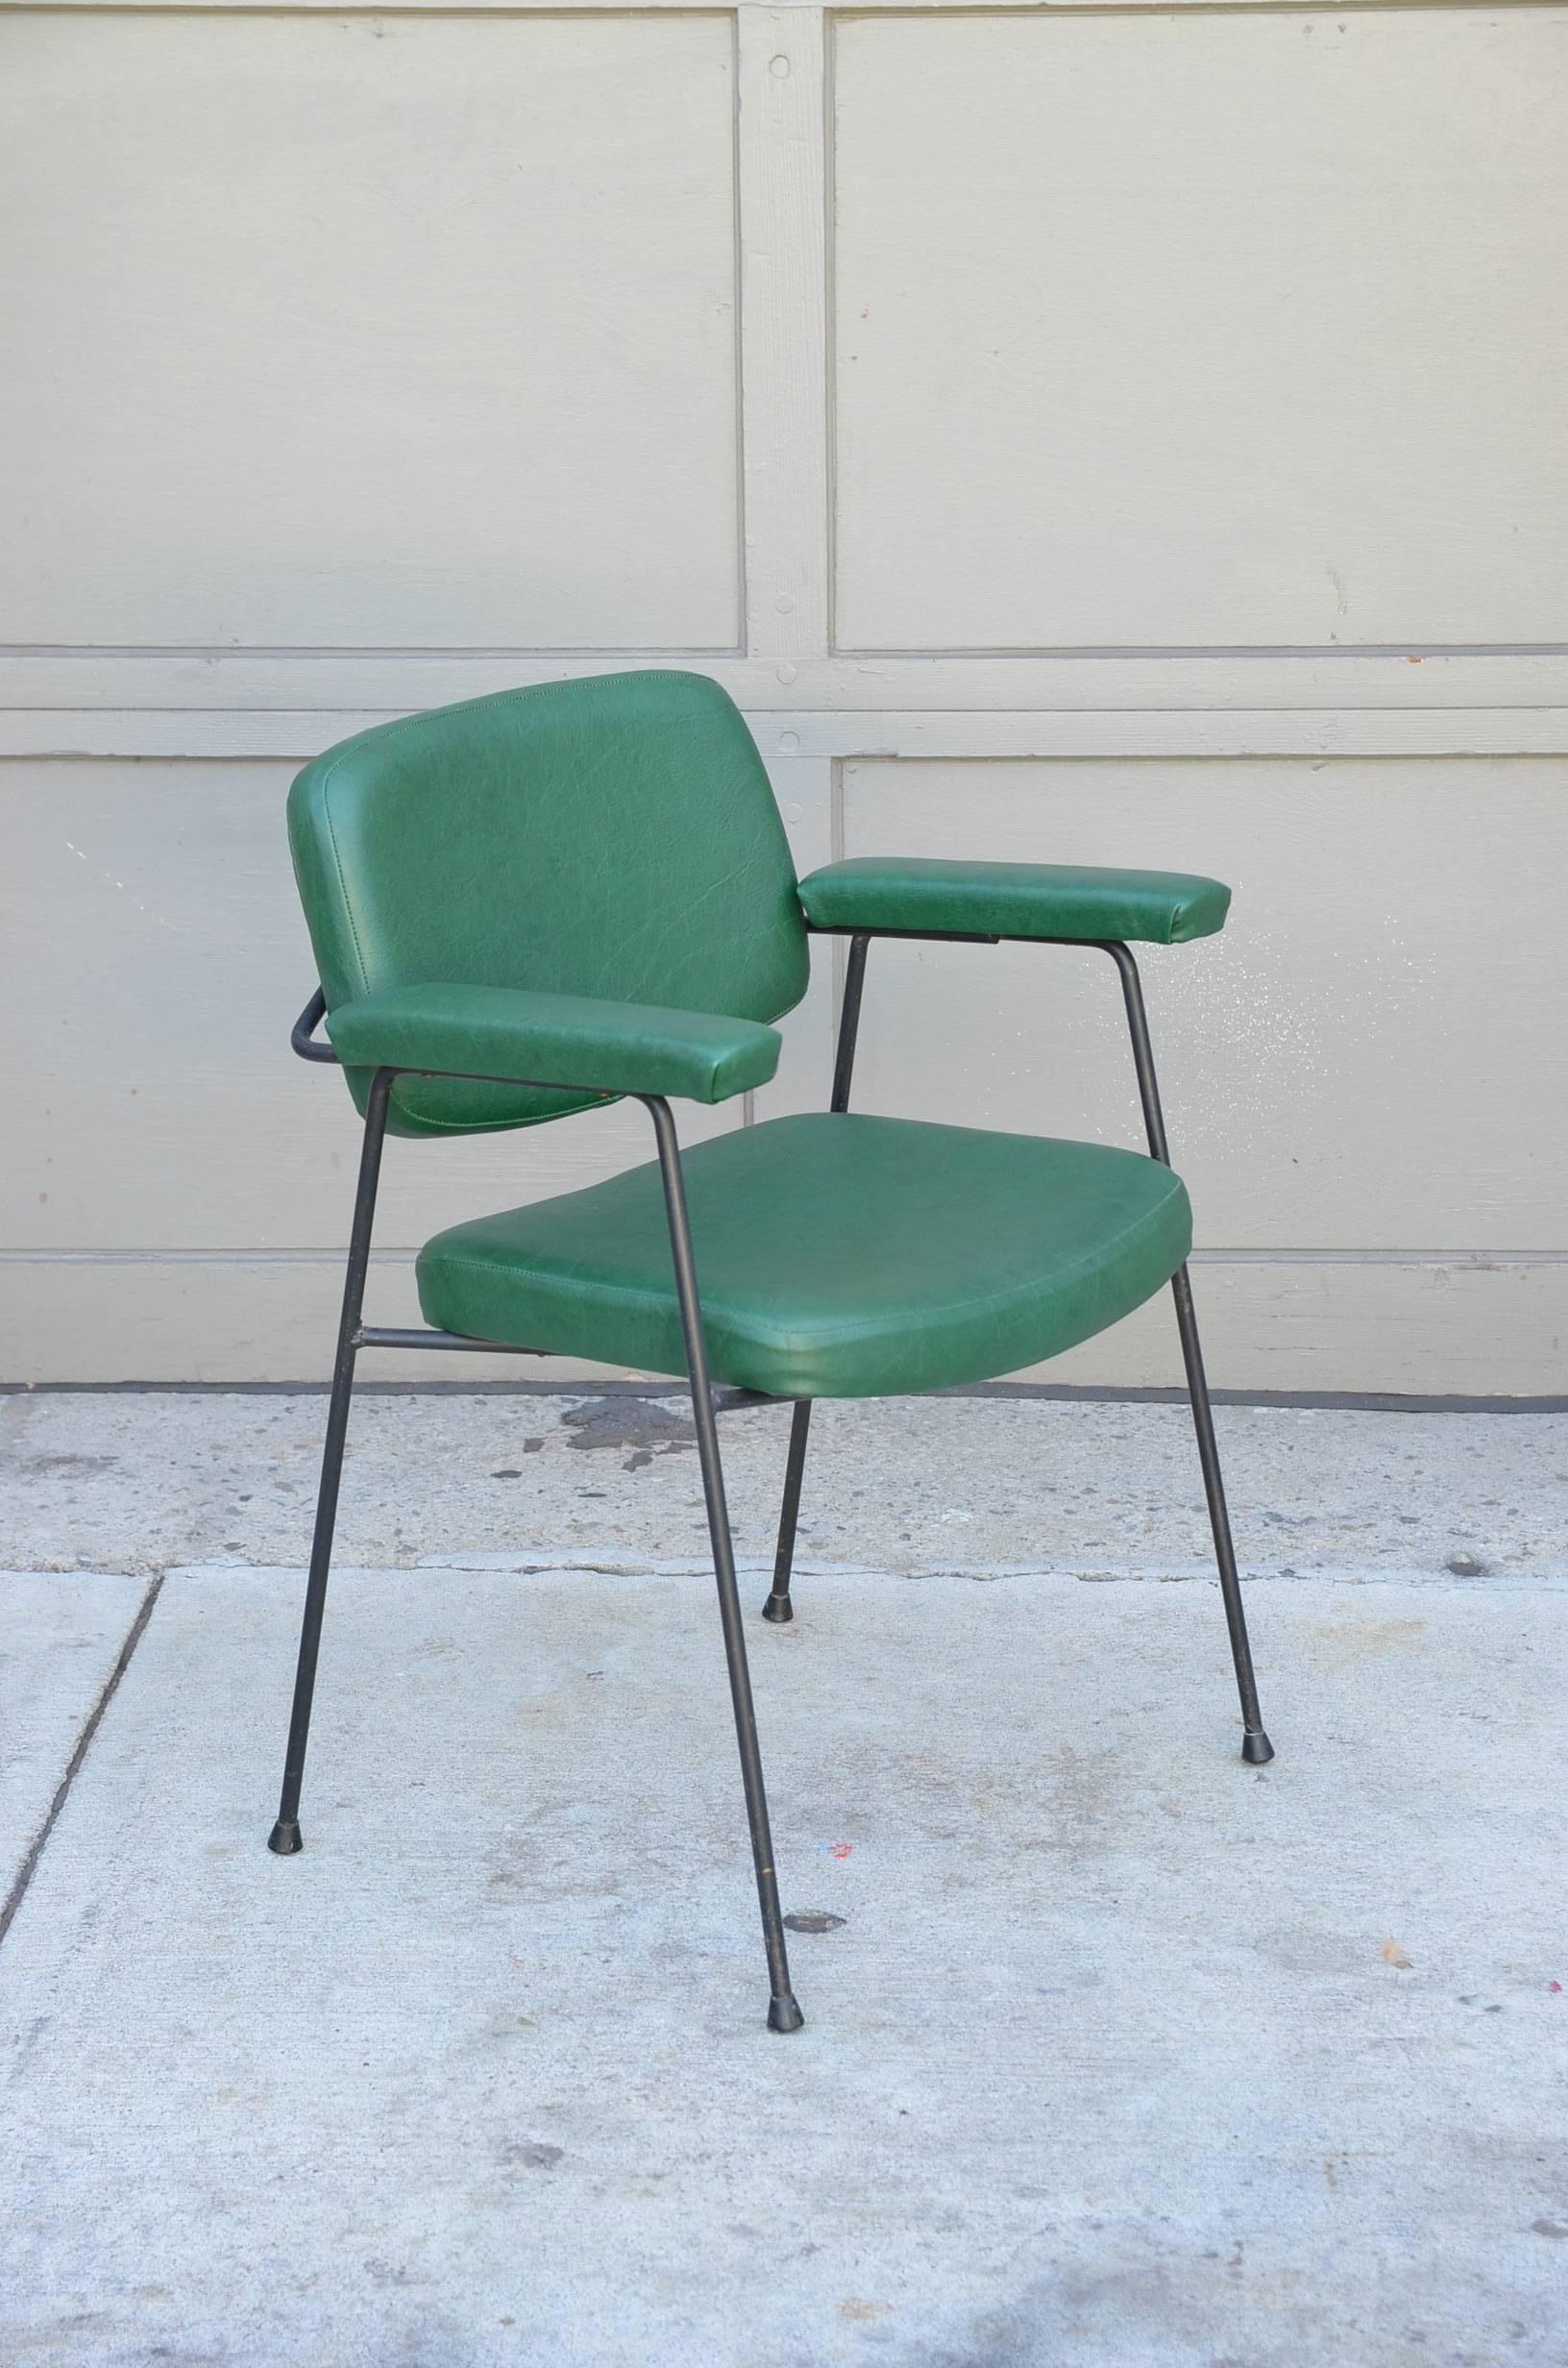 Original CM197 armchair by Pierre Paulin. Designed for Thonet, France in 1958. Green vinyl upholstery in excellent original condition. Can be reupholstered easily with two yards C.O.M.